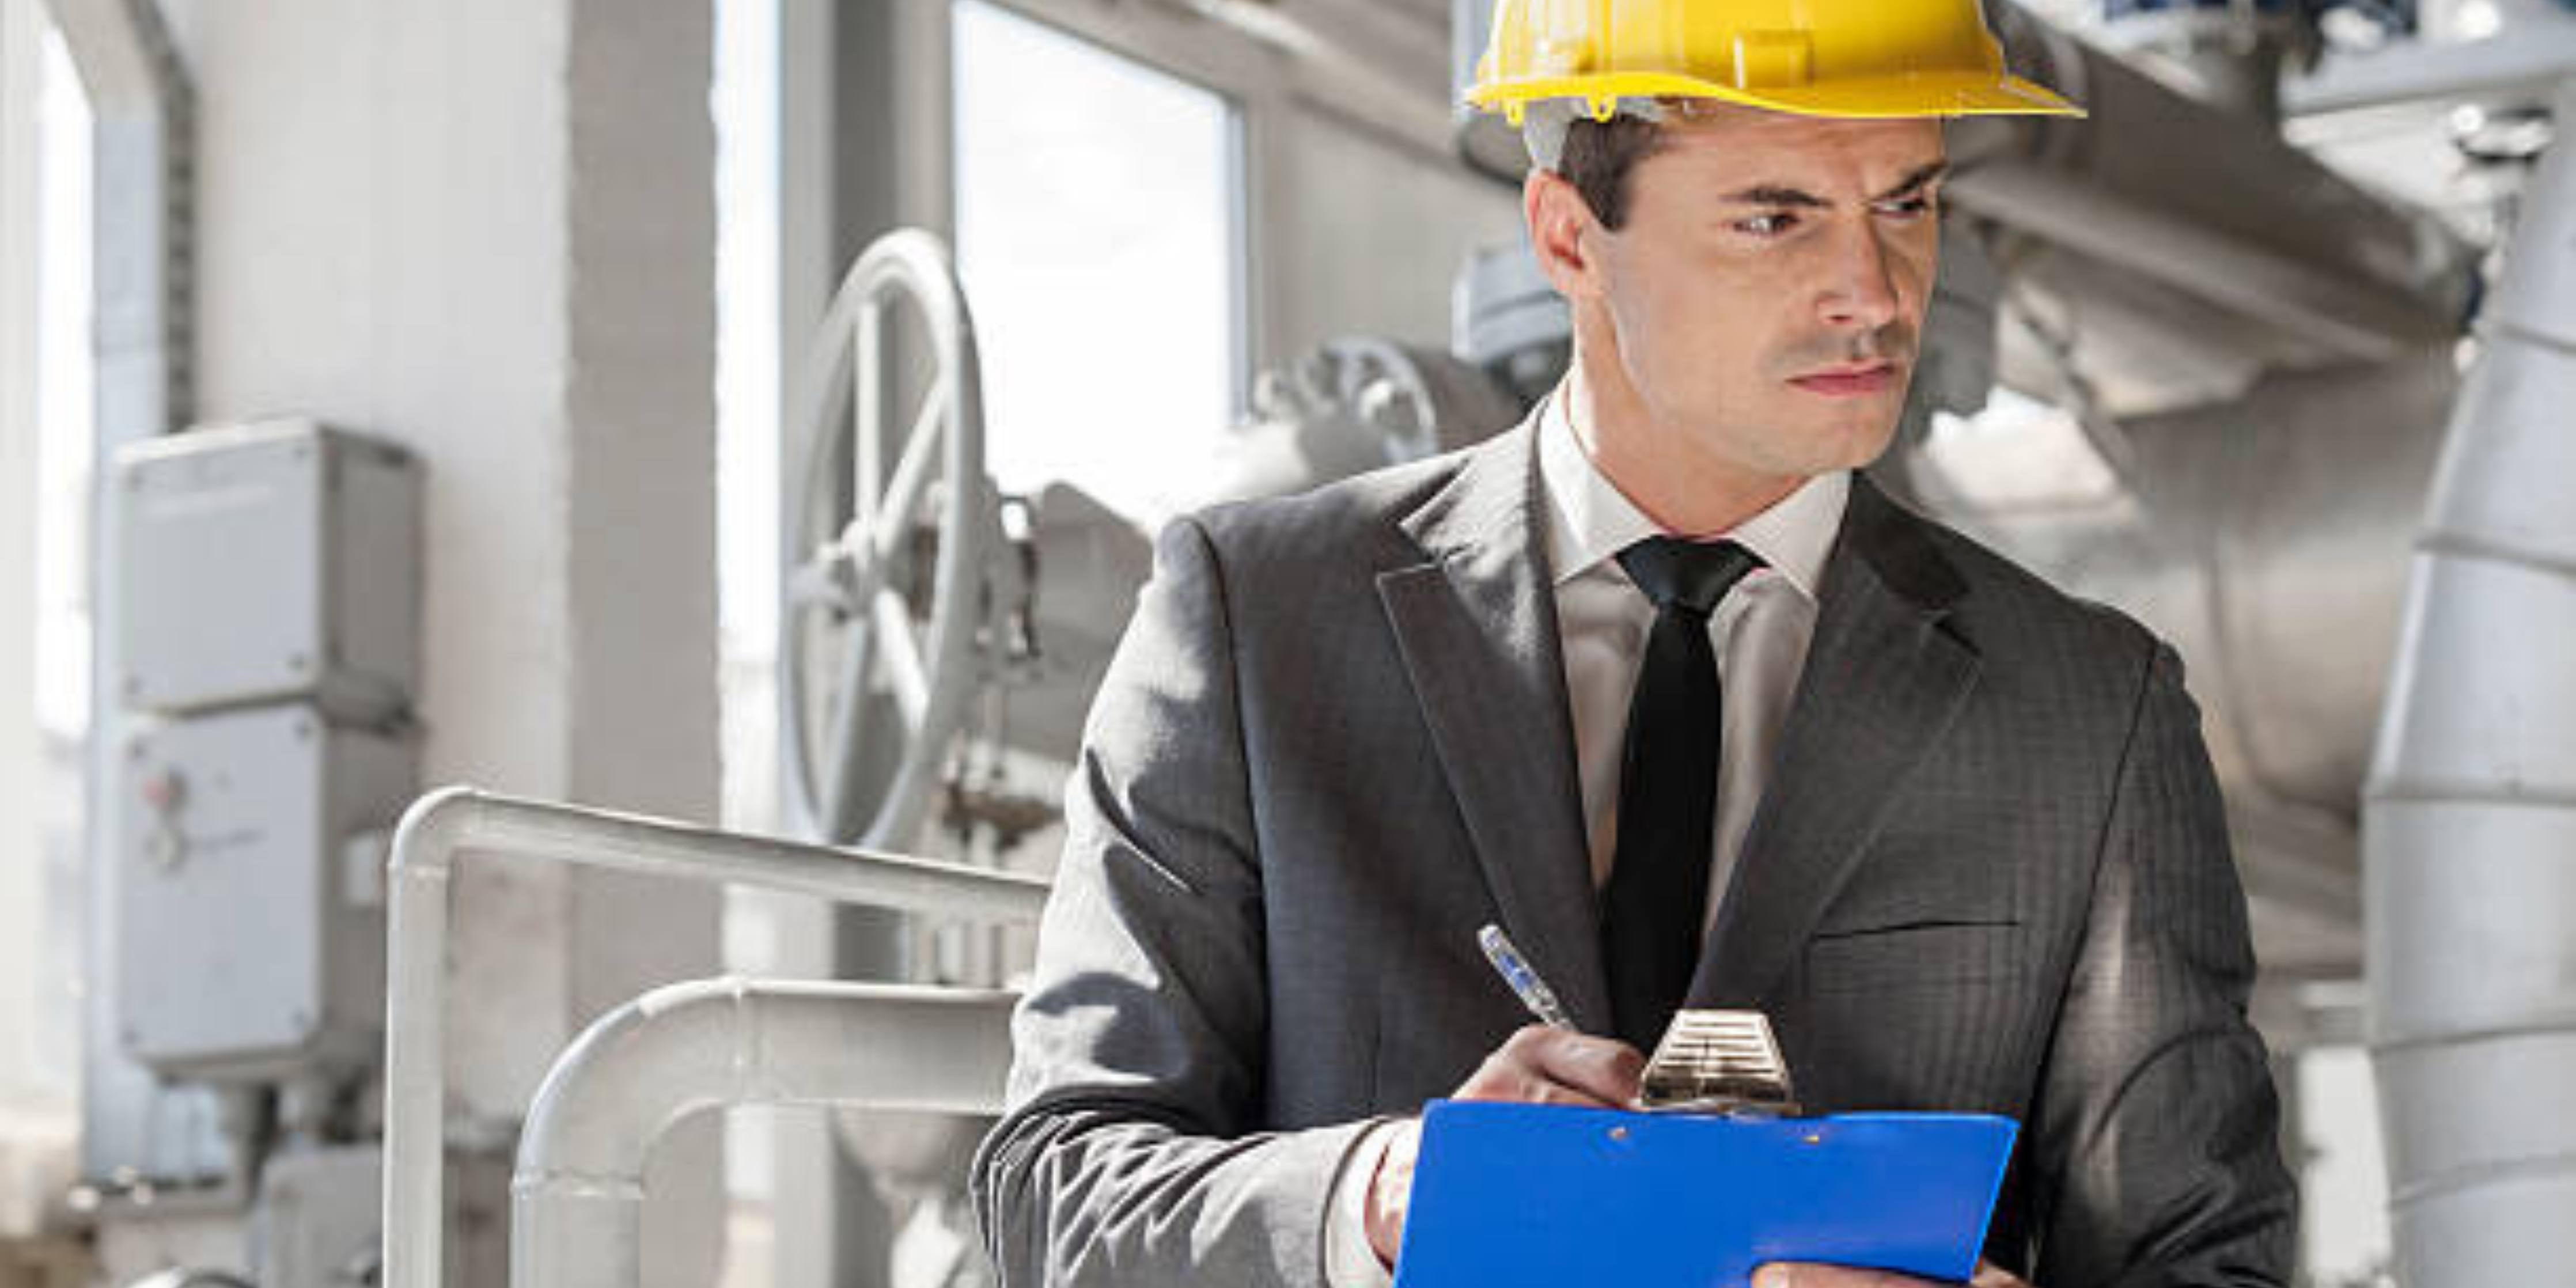 Man holding clipboard with hard hat on, in manufacturing setting for workplace inspections